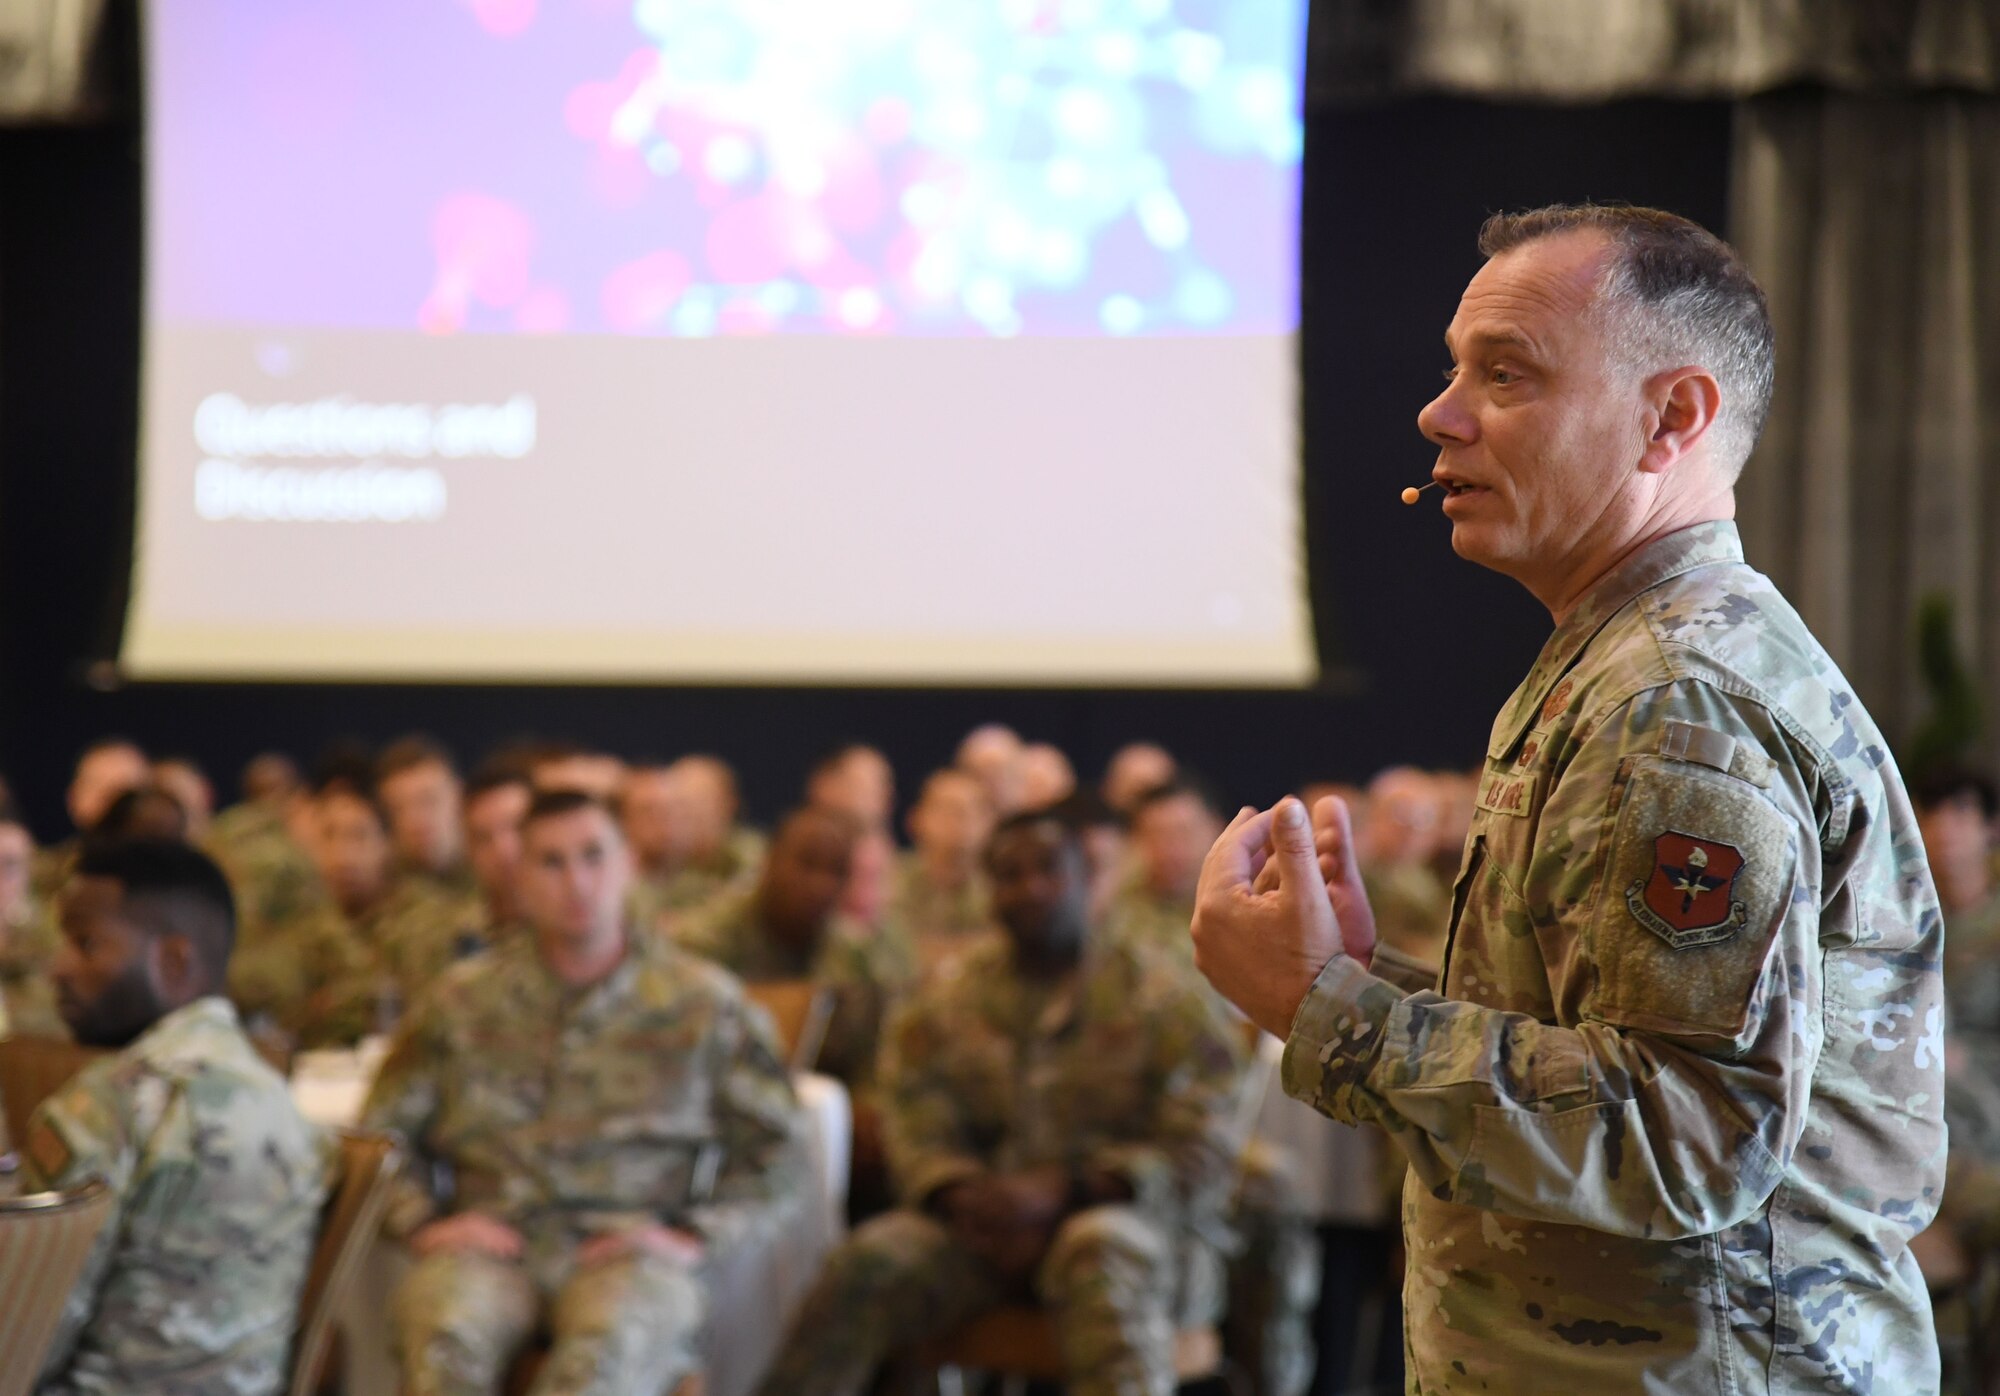 U.S. Air Force Chief Master Sgt. Erik Thompson, command chief of Air Education and Training Command, speaks with Airman from AETC and Air Force Special Operations Command , during the inaugural Torch and Dagger professional development seminar at Keesler Air Force Base, Mississippi, October 15, 2022